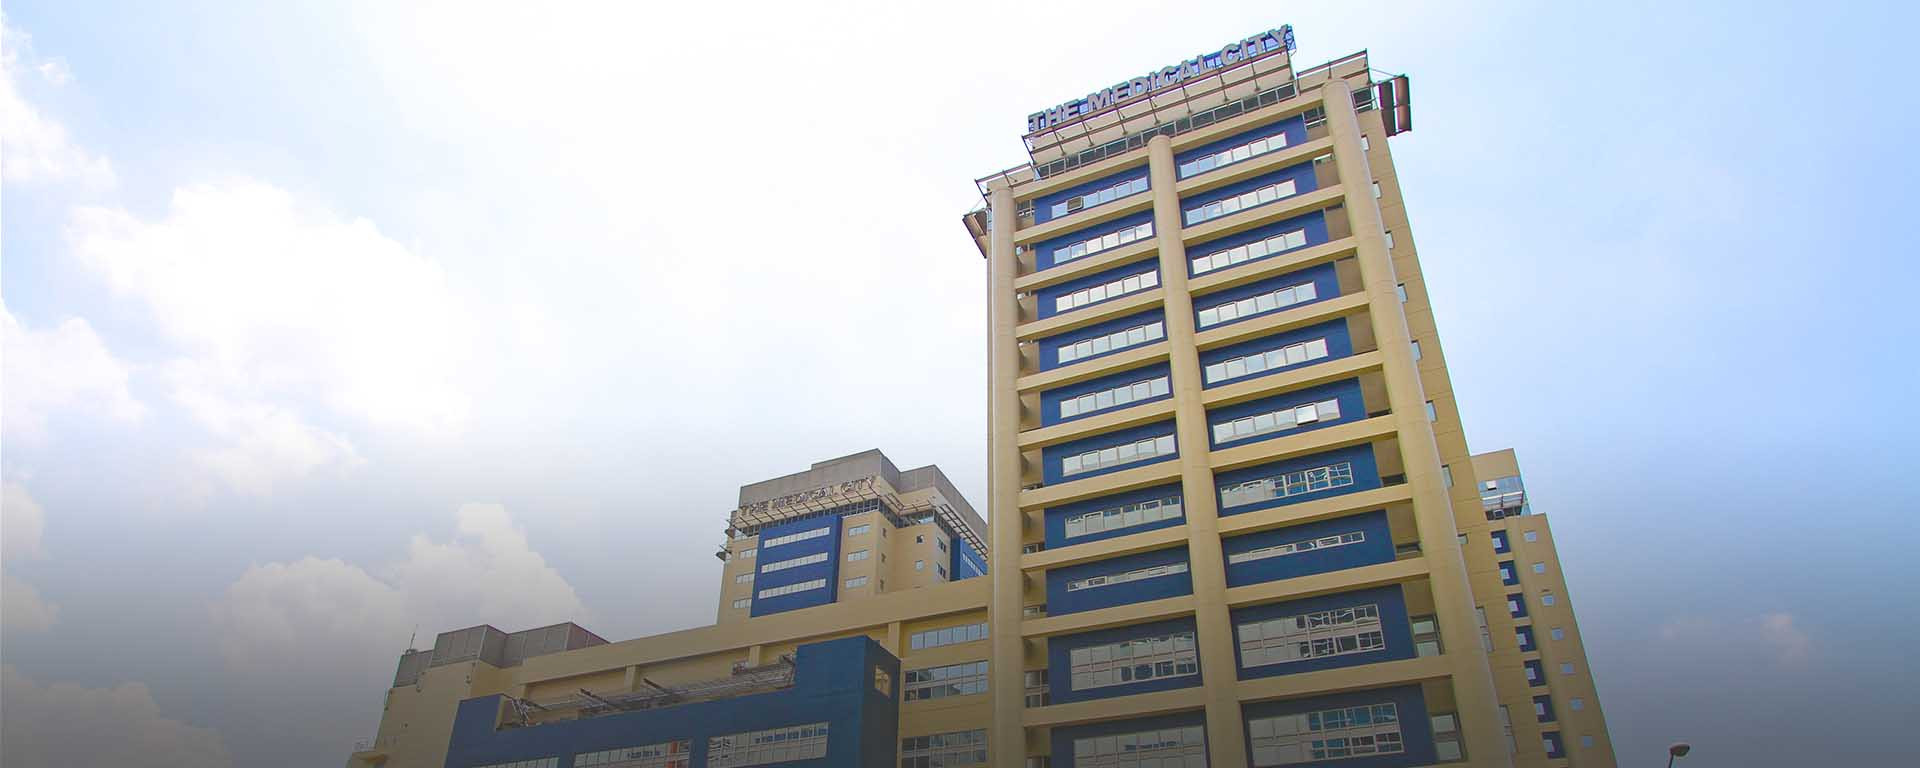 the medical city compound